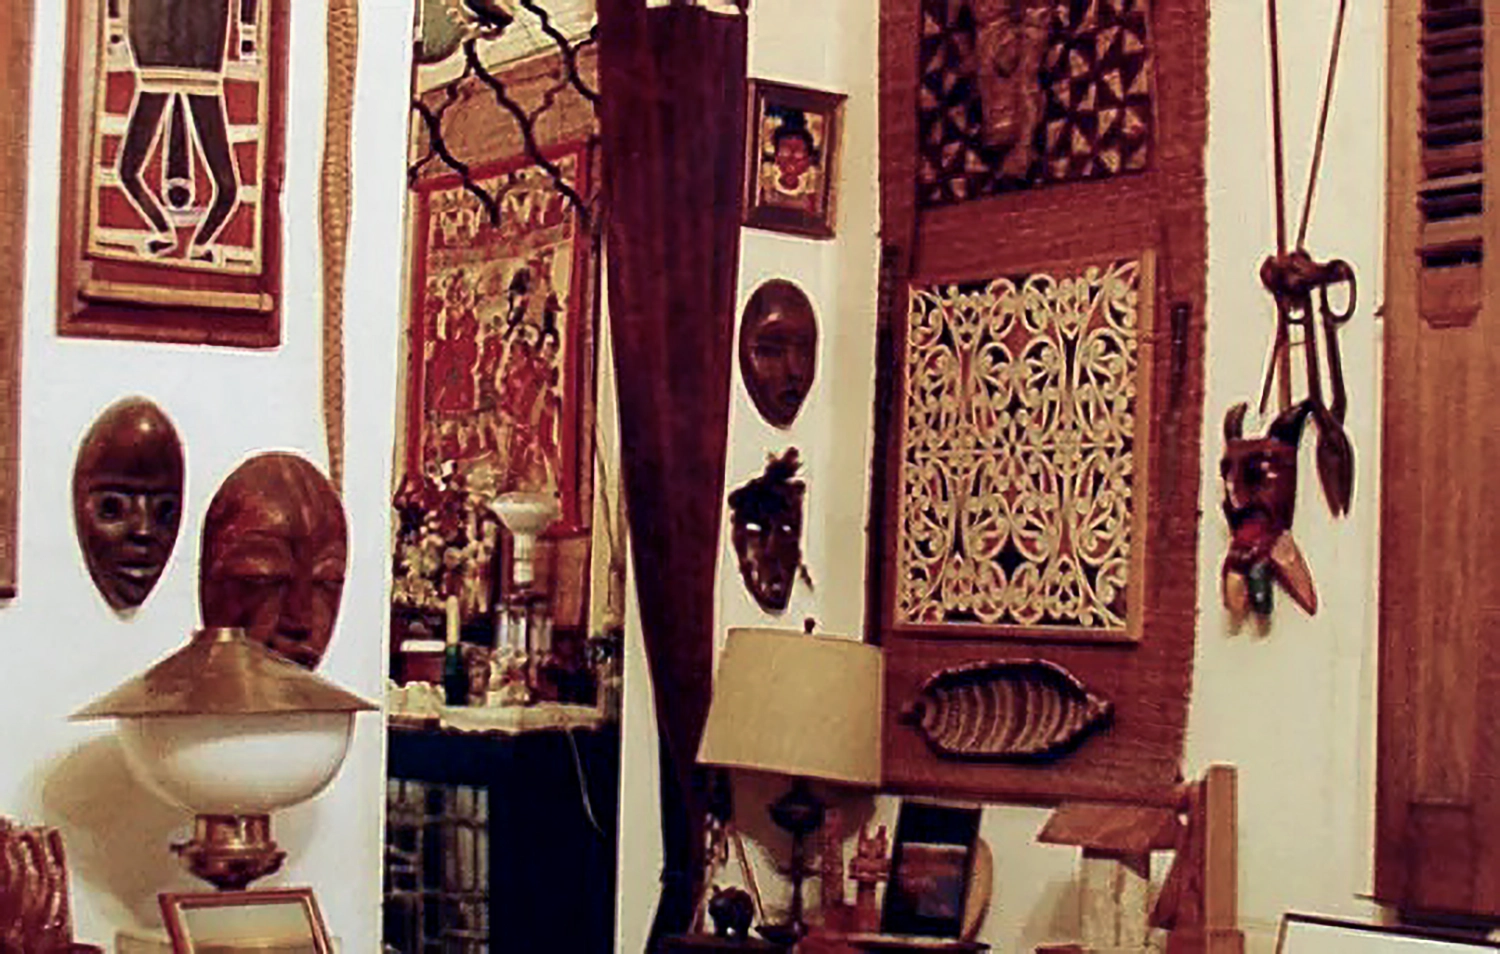 A room filled with what appears to be indigenous artworks, woven vessels, and African masks.